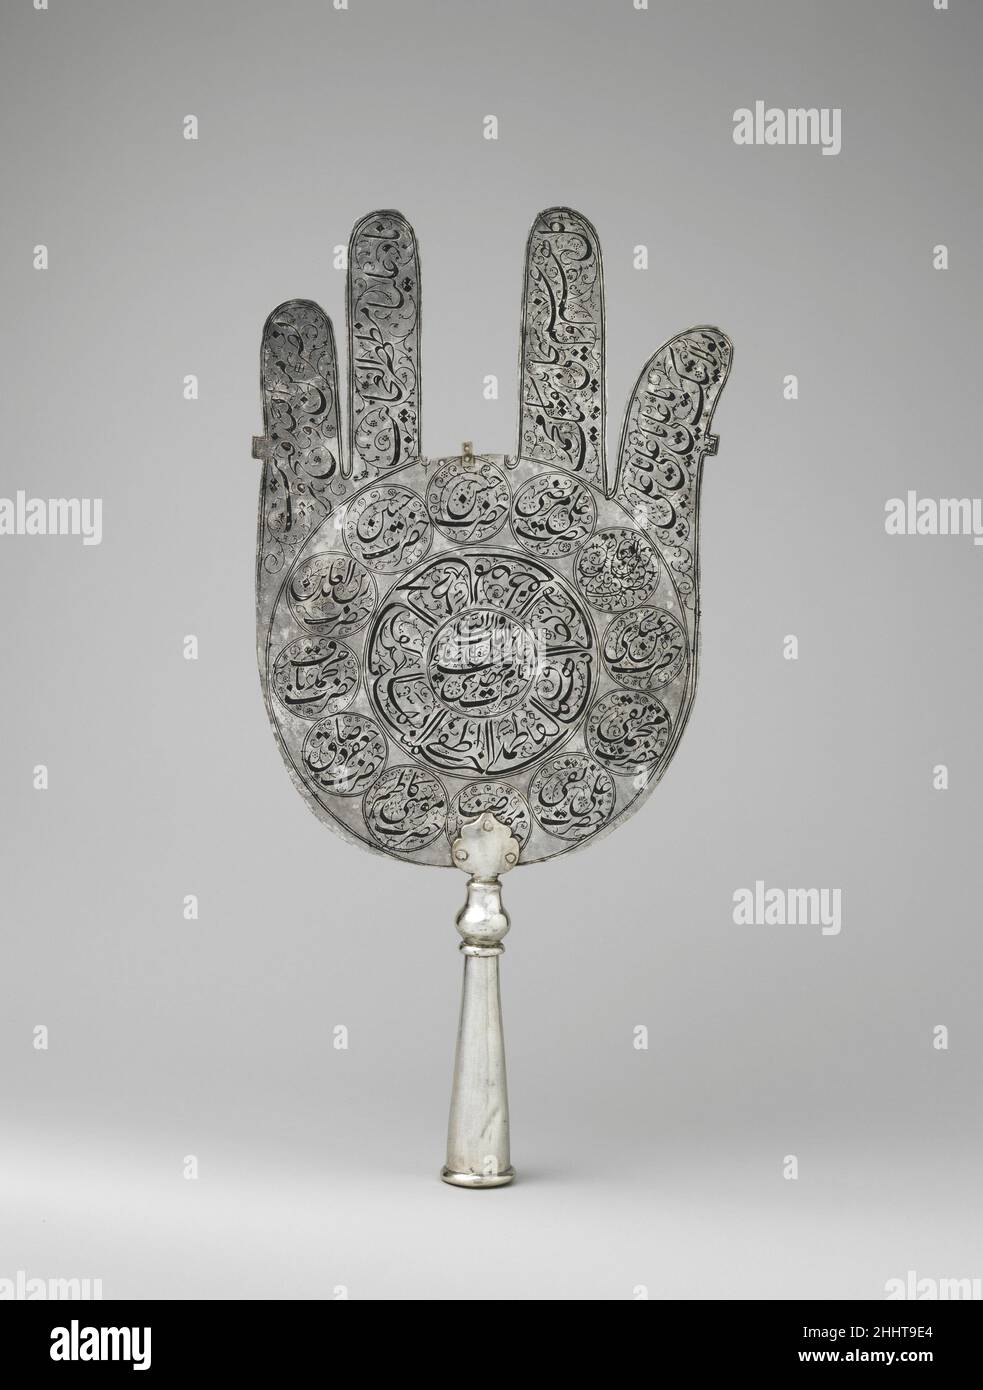 Standard early 18th century Under the Ottomans, Safavids, and Mughals, steel or silver standards were used in military, royal, and religious ceremonies. The talismanic power of this standard ('alam) is understood through the choice of the inscriptions. On one side, in the centermost circle, the Shi'i prayer venerates the Prophet Muhammad's family through his cousin and son-in-law 'Ali, his wife Fatima, and their sons Hasan and Husain, supported by the protective Throne verse (2:255). The other side honors the twelve imams, with the name of the twelfth imam enclosed in the central circle. As fo Stock Photo